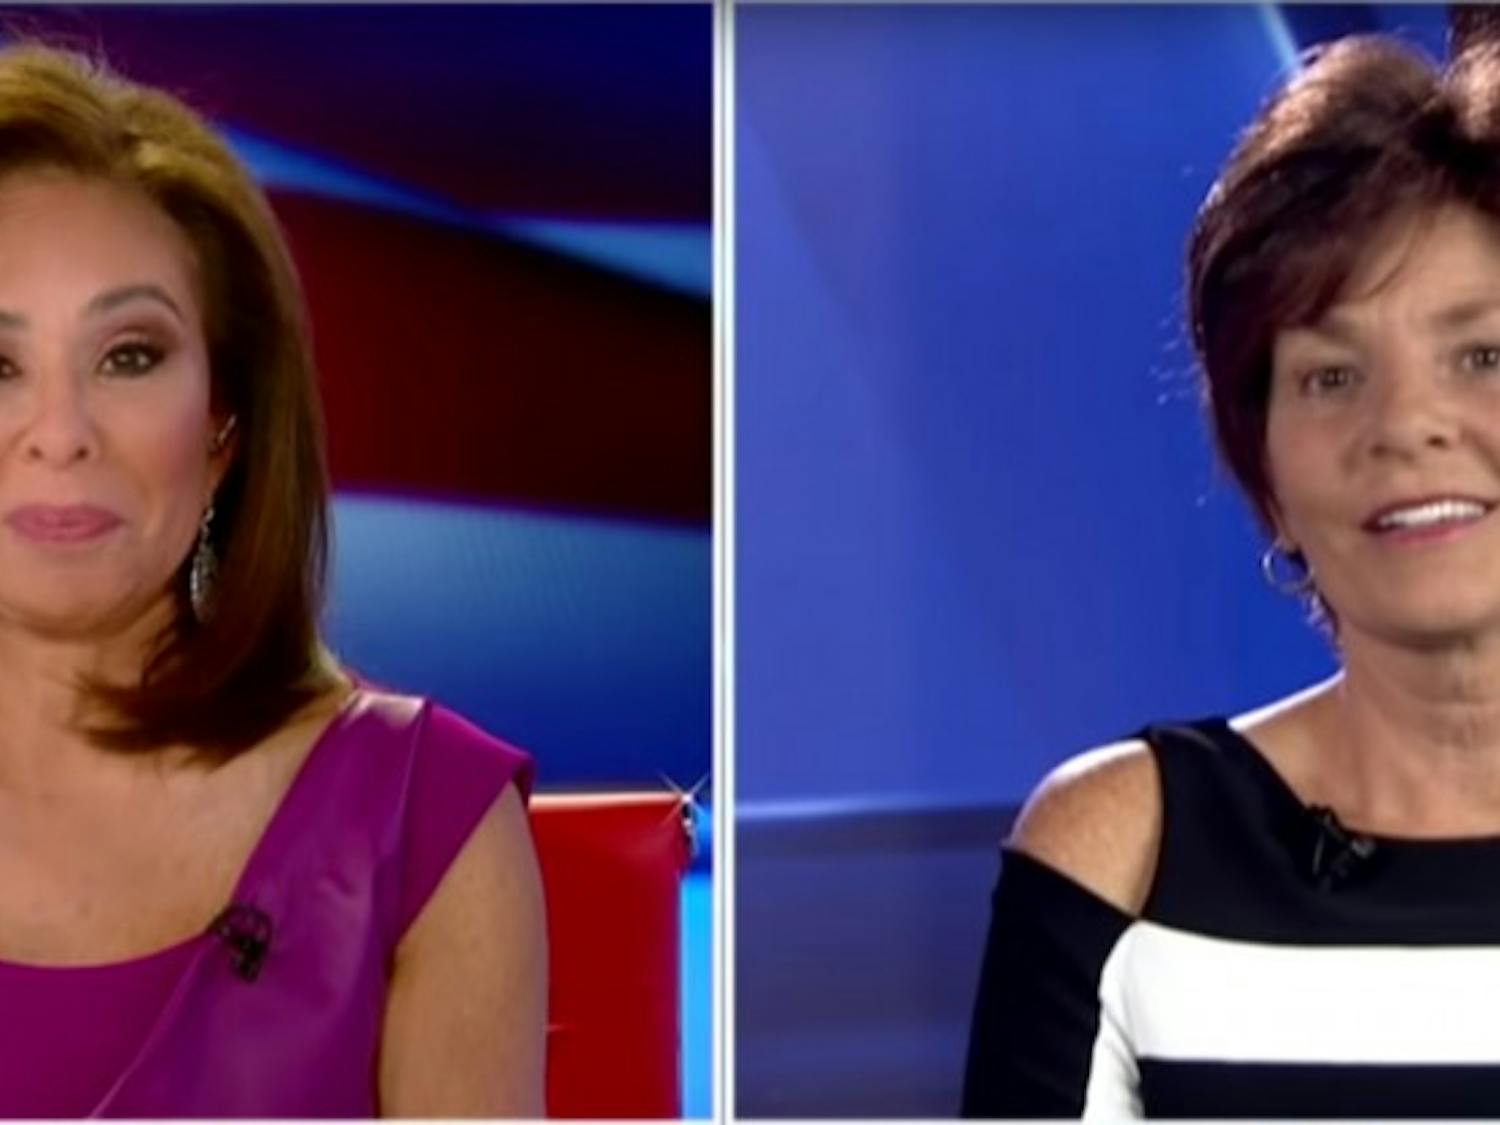 Screen grab of interview between Judge Jeanine Pirro and State Rep. Yvette Herrell on Fox News.